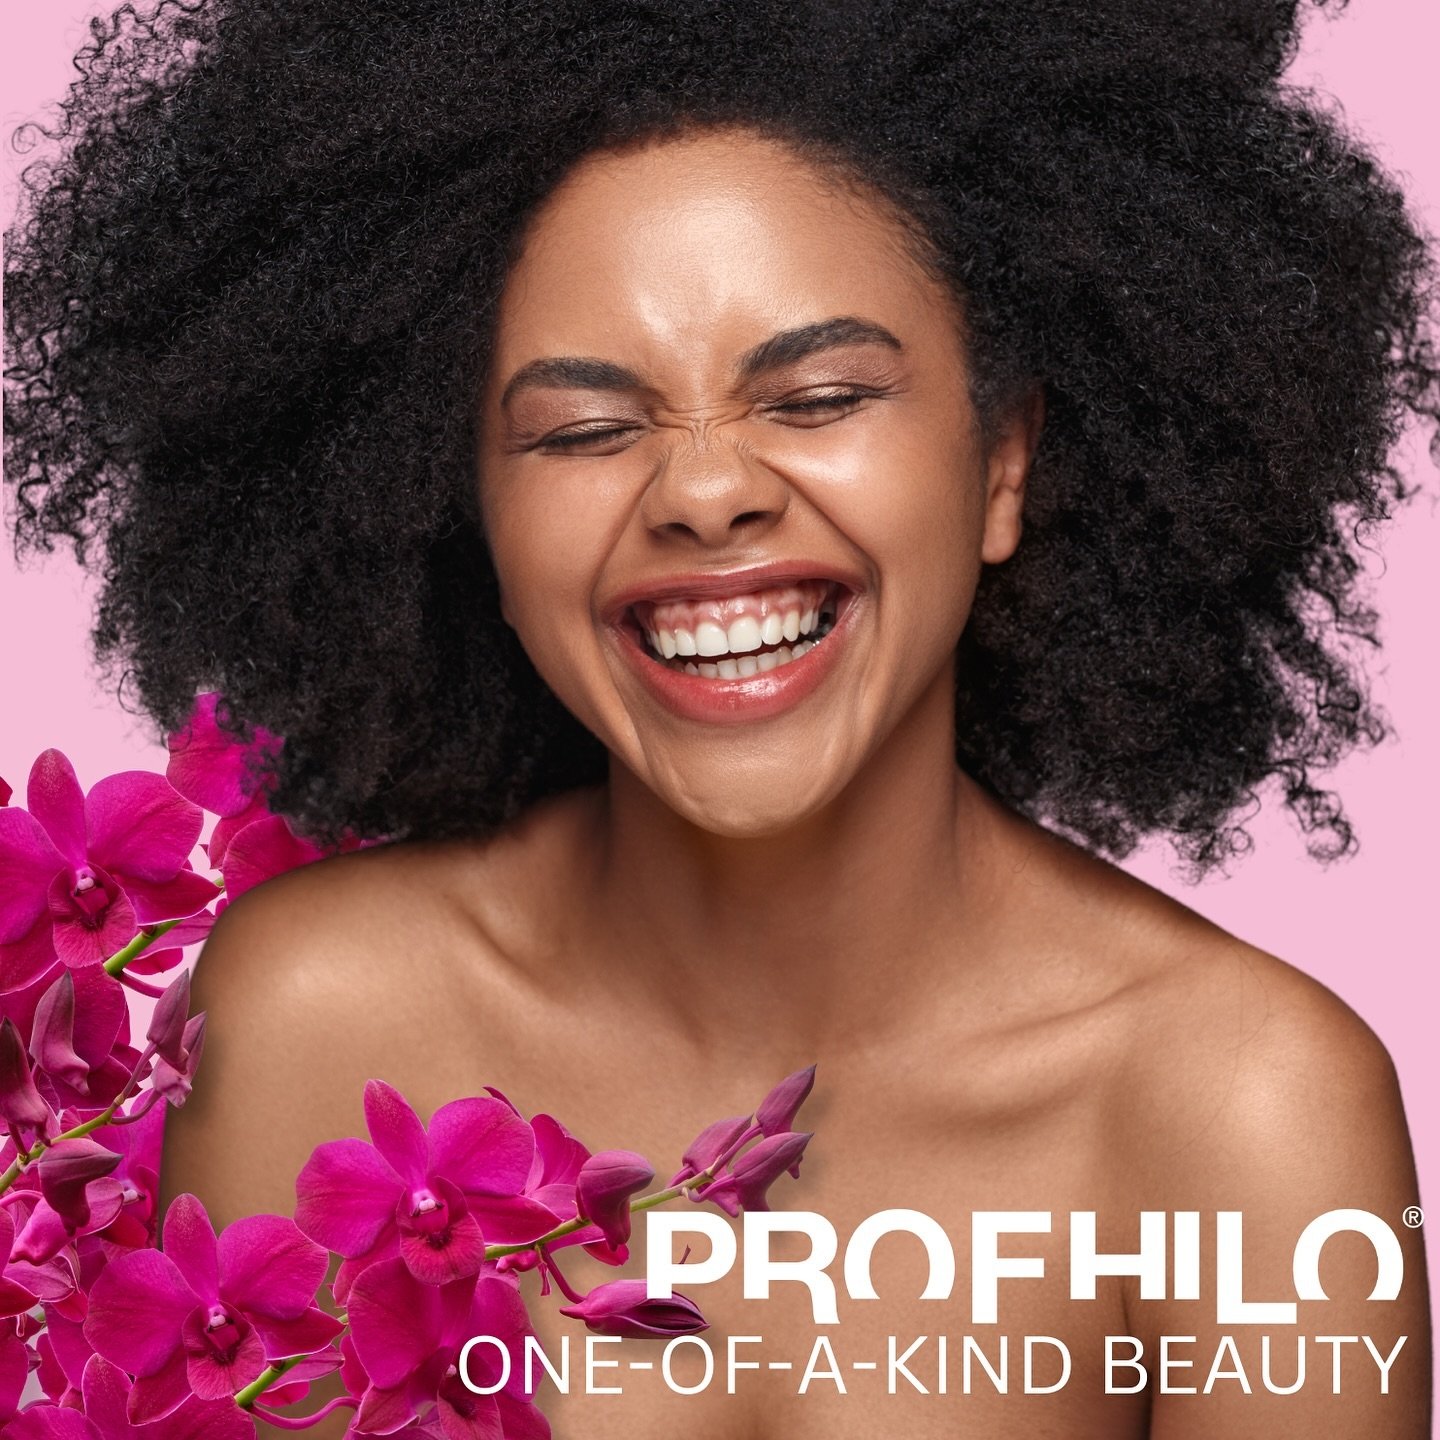 Rediscover your one-of-kind-beauty with Profhilo&reg;! Stimulating and regenerating from within, Profhilo&reg;&lsquo;s patented NAHYCO technology naturally restores your skin&rsquo;s firmness, tone, and elasticity 💉

#Profhilo #InjectableTreatment #